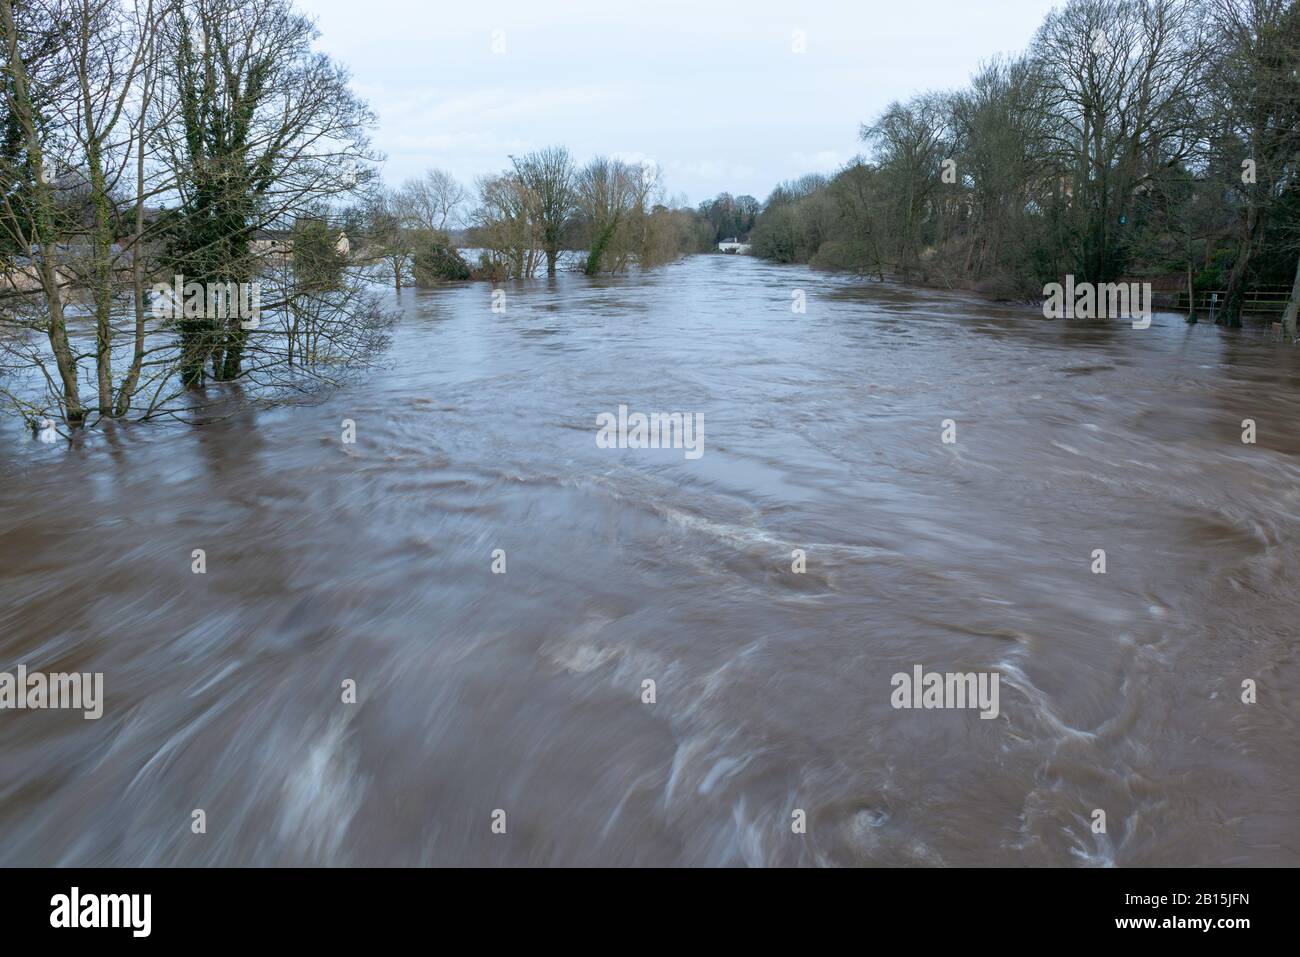 View of the River Wharfe from the Throp Arch Bridge, Boston Spa showing the river breaking its banks and flooding surrounding fields Stock Photo